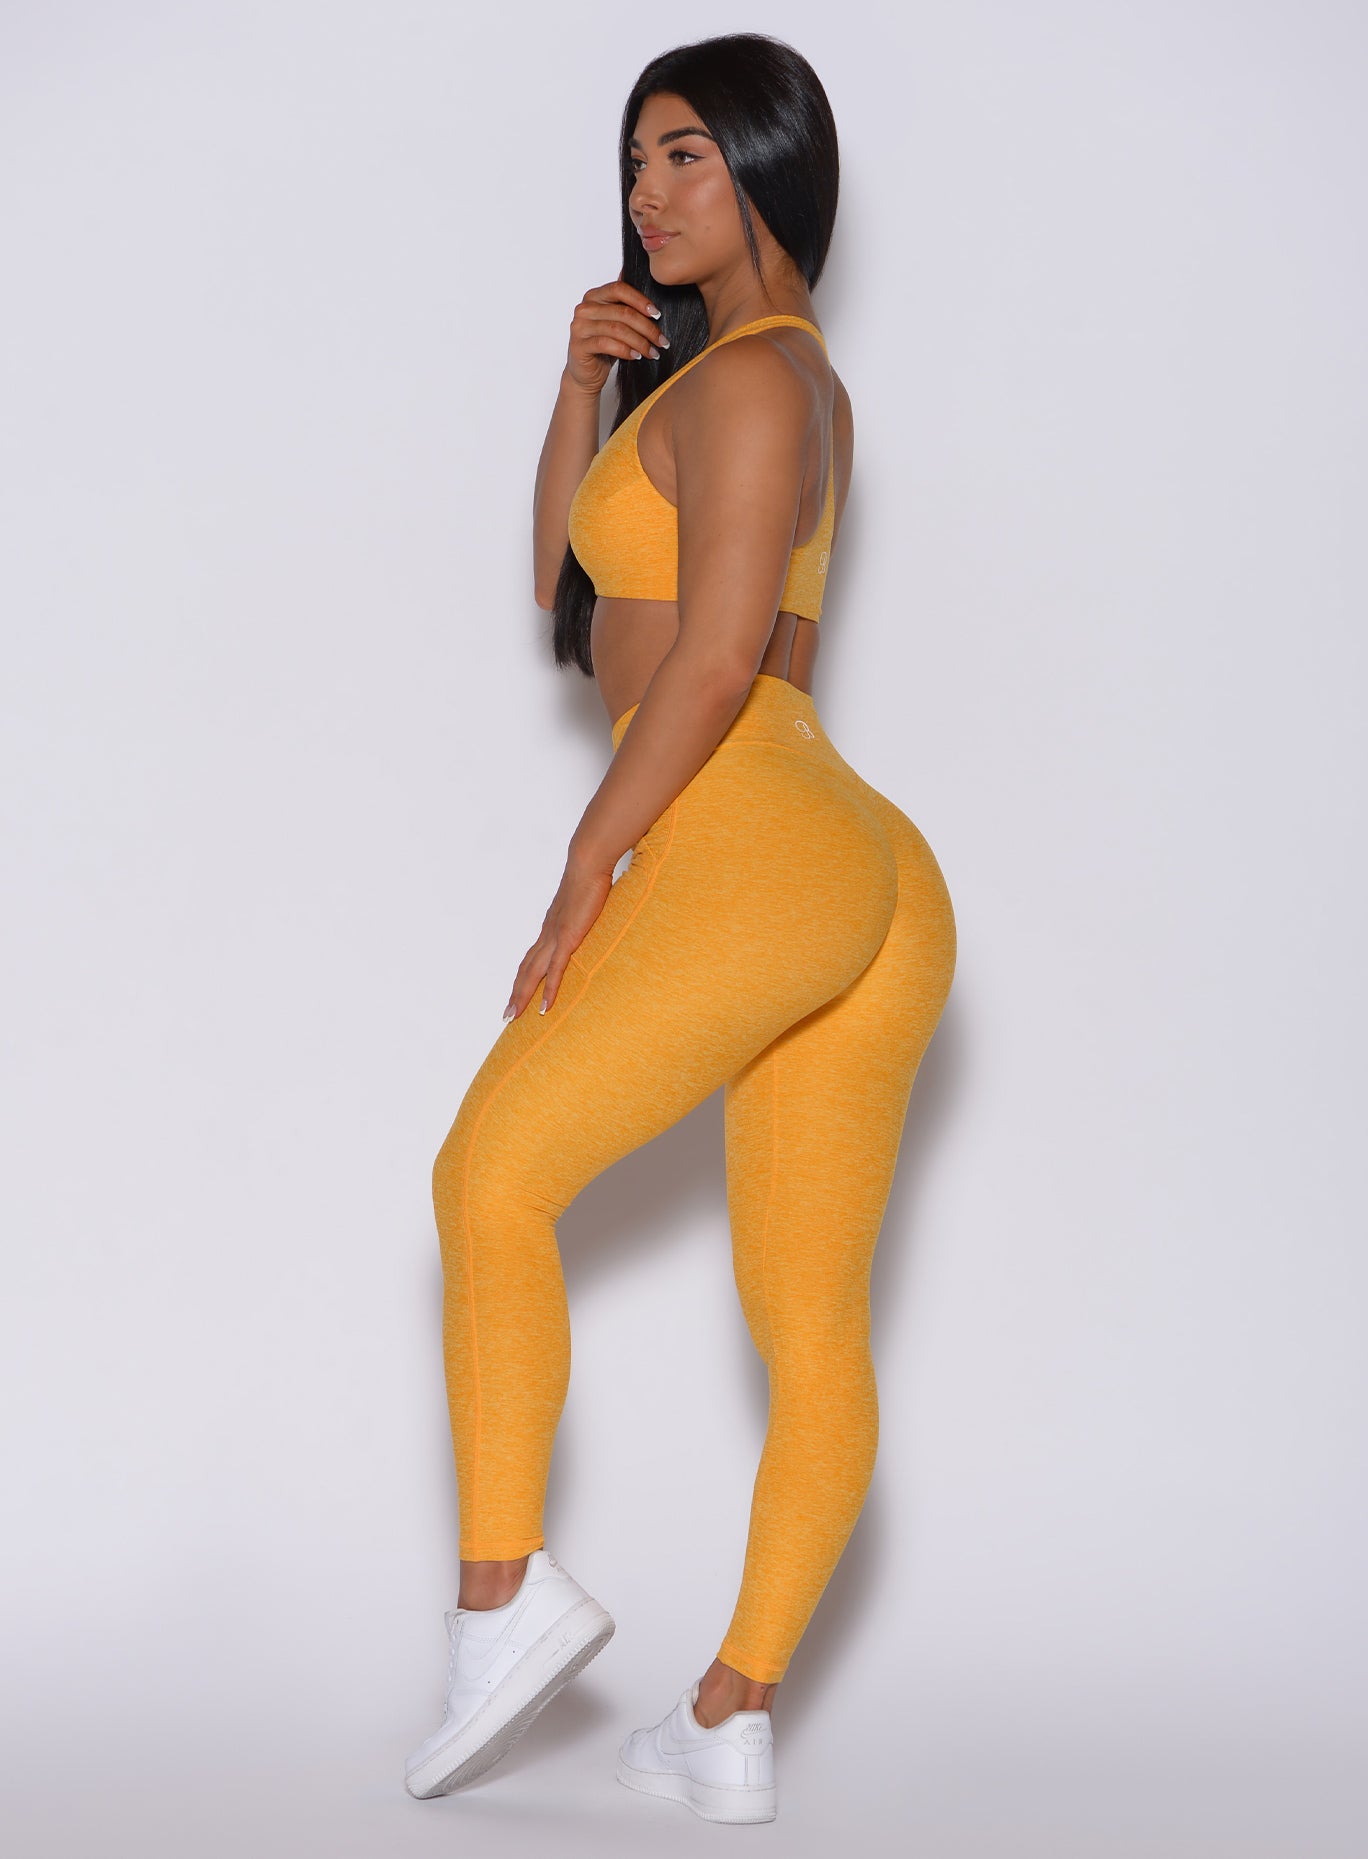 Left side  profile view of a model in our V scrunch leggings in sinkissed color and a matching sports bra